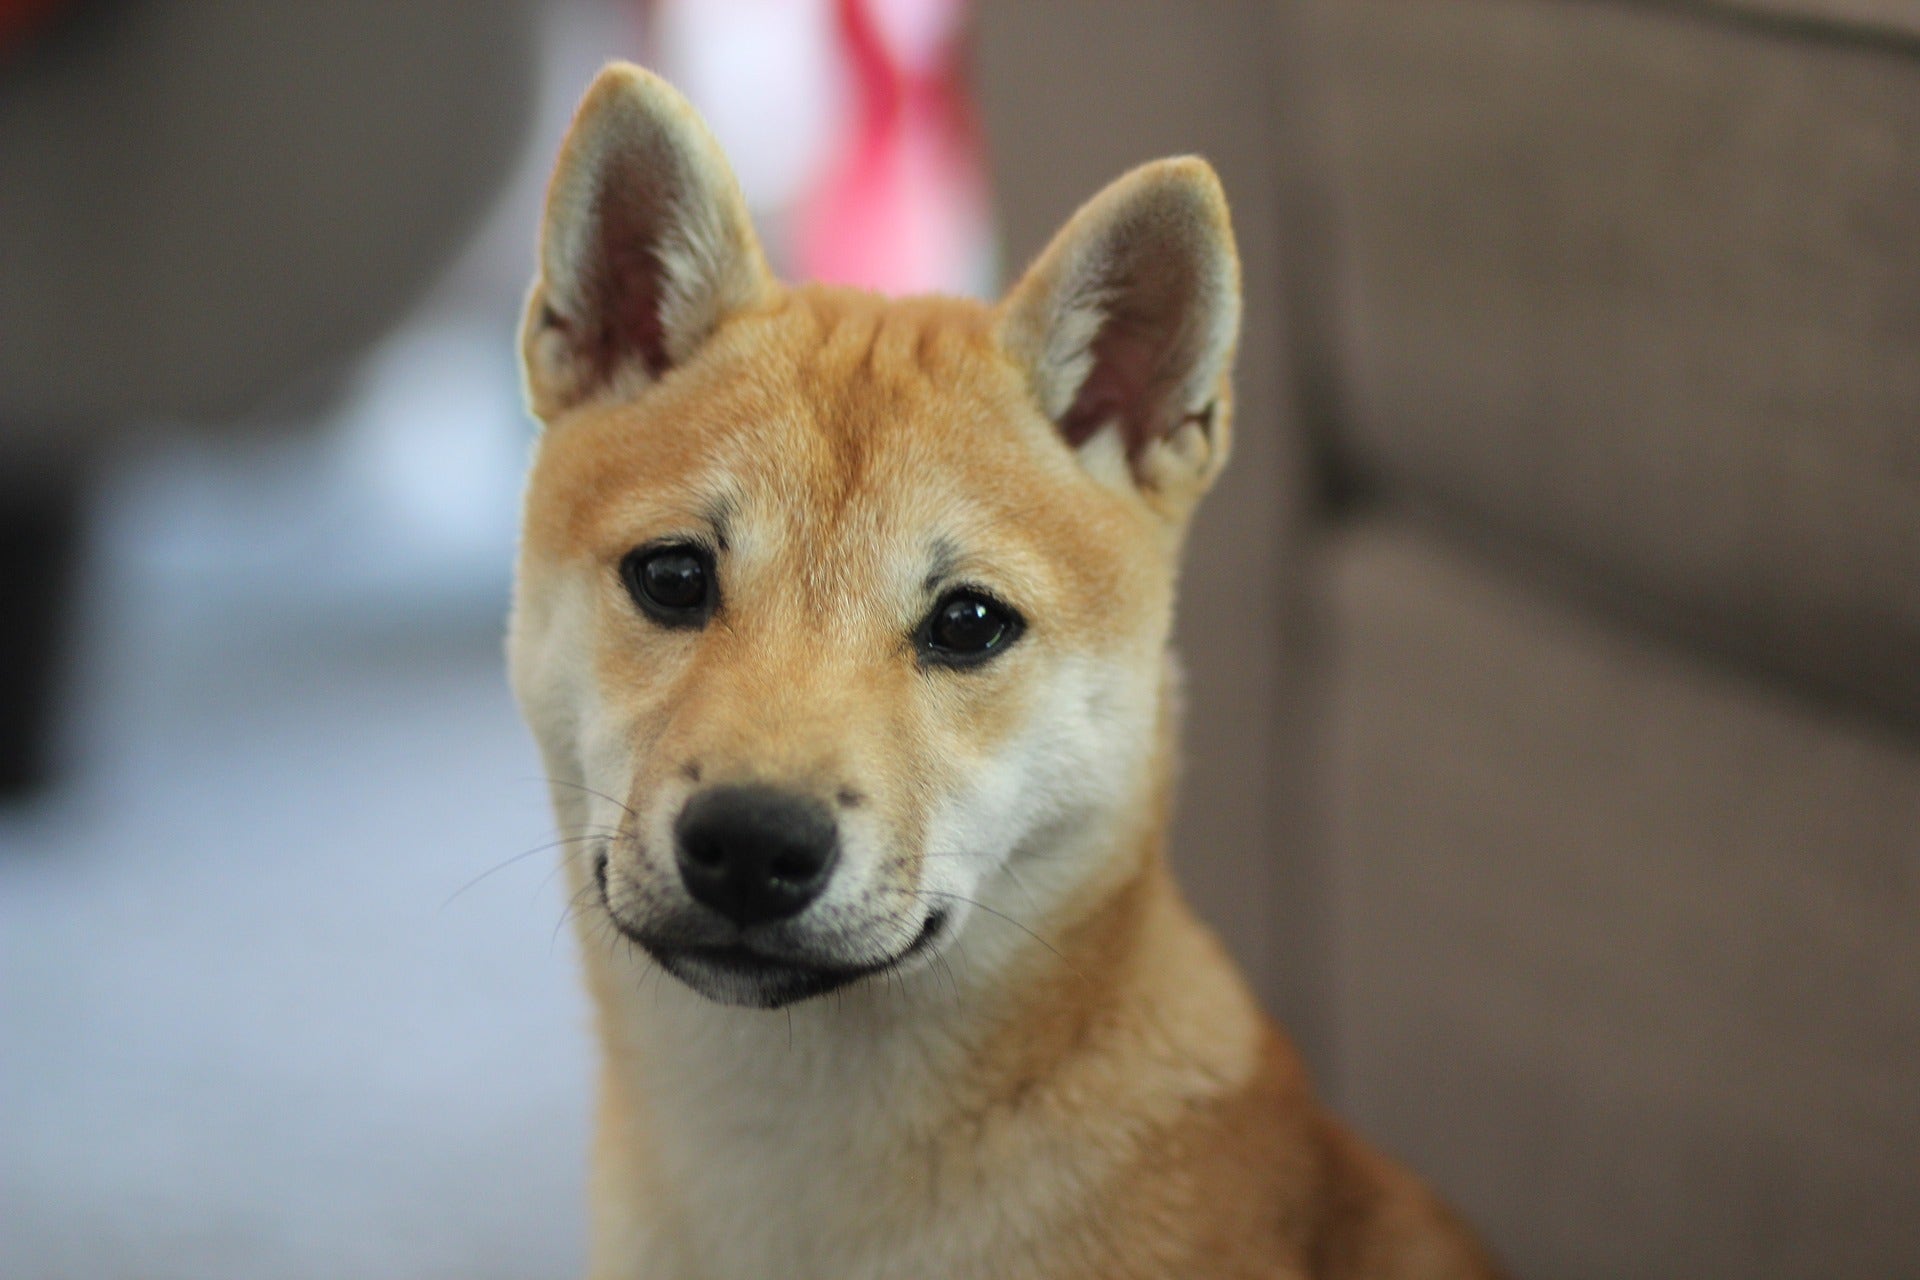 Rivian, Shiba Inu Are More Alike Than Different, Says Bedrock Capital Co-Founder